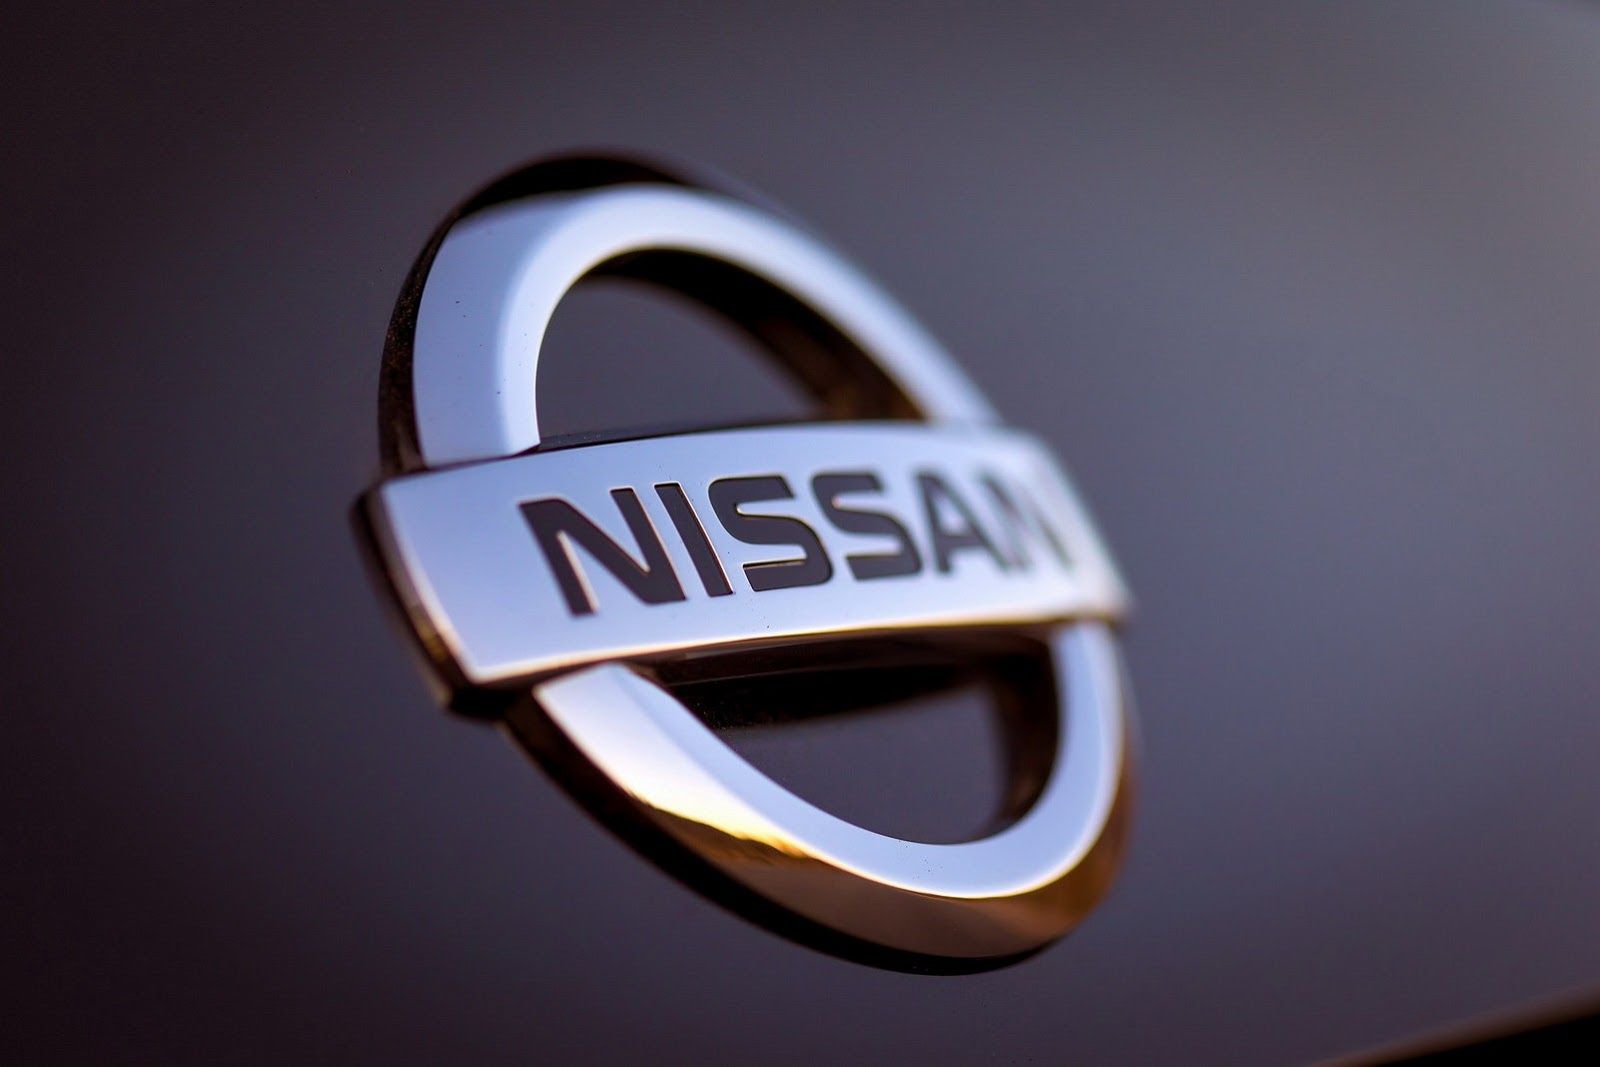 Nissan to stop the usage of Takata Airbags following Toyota, Mazda and Honda